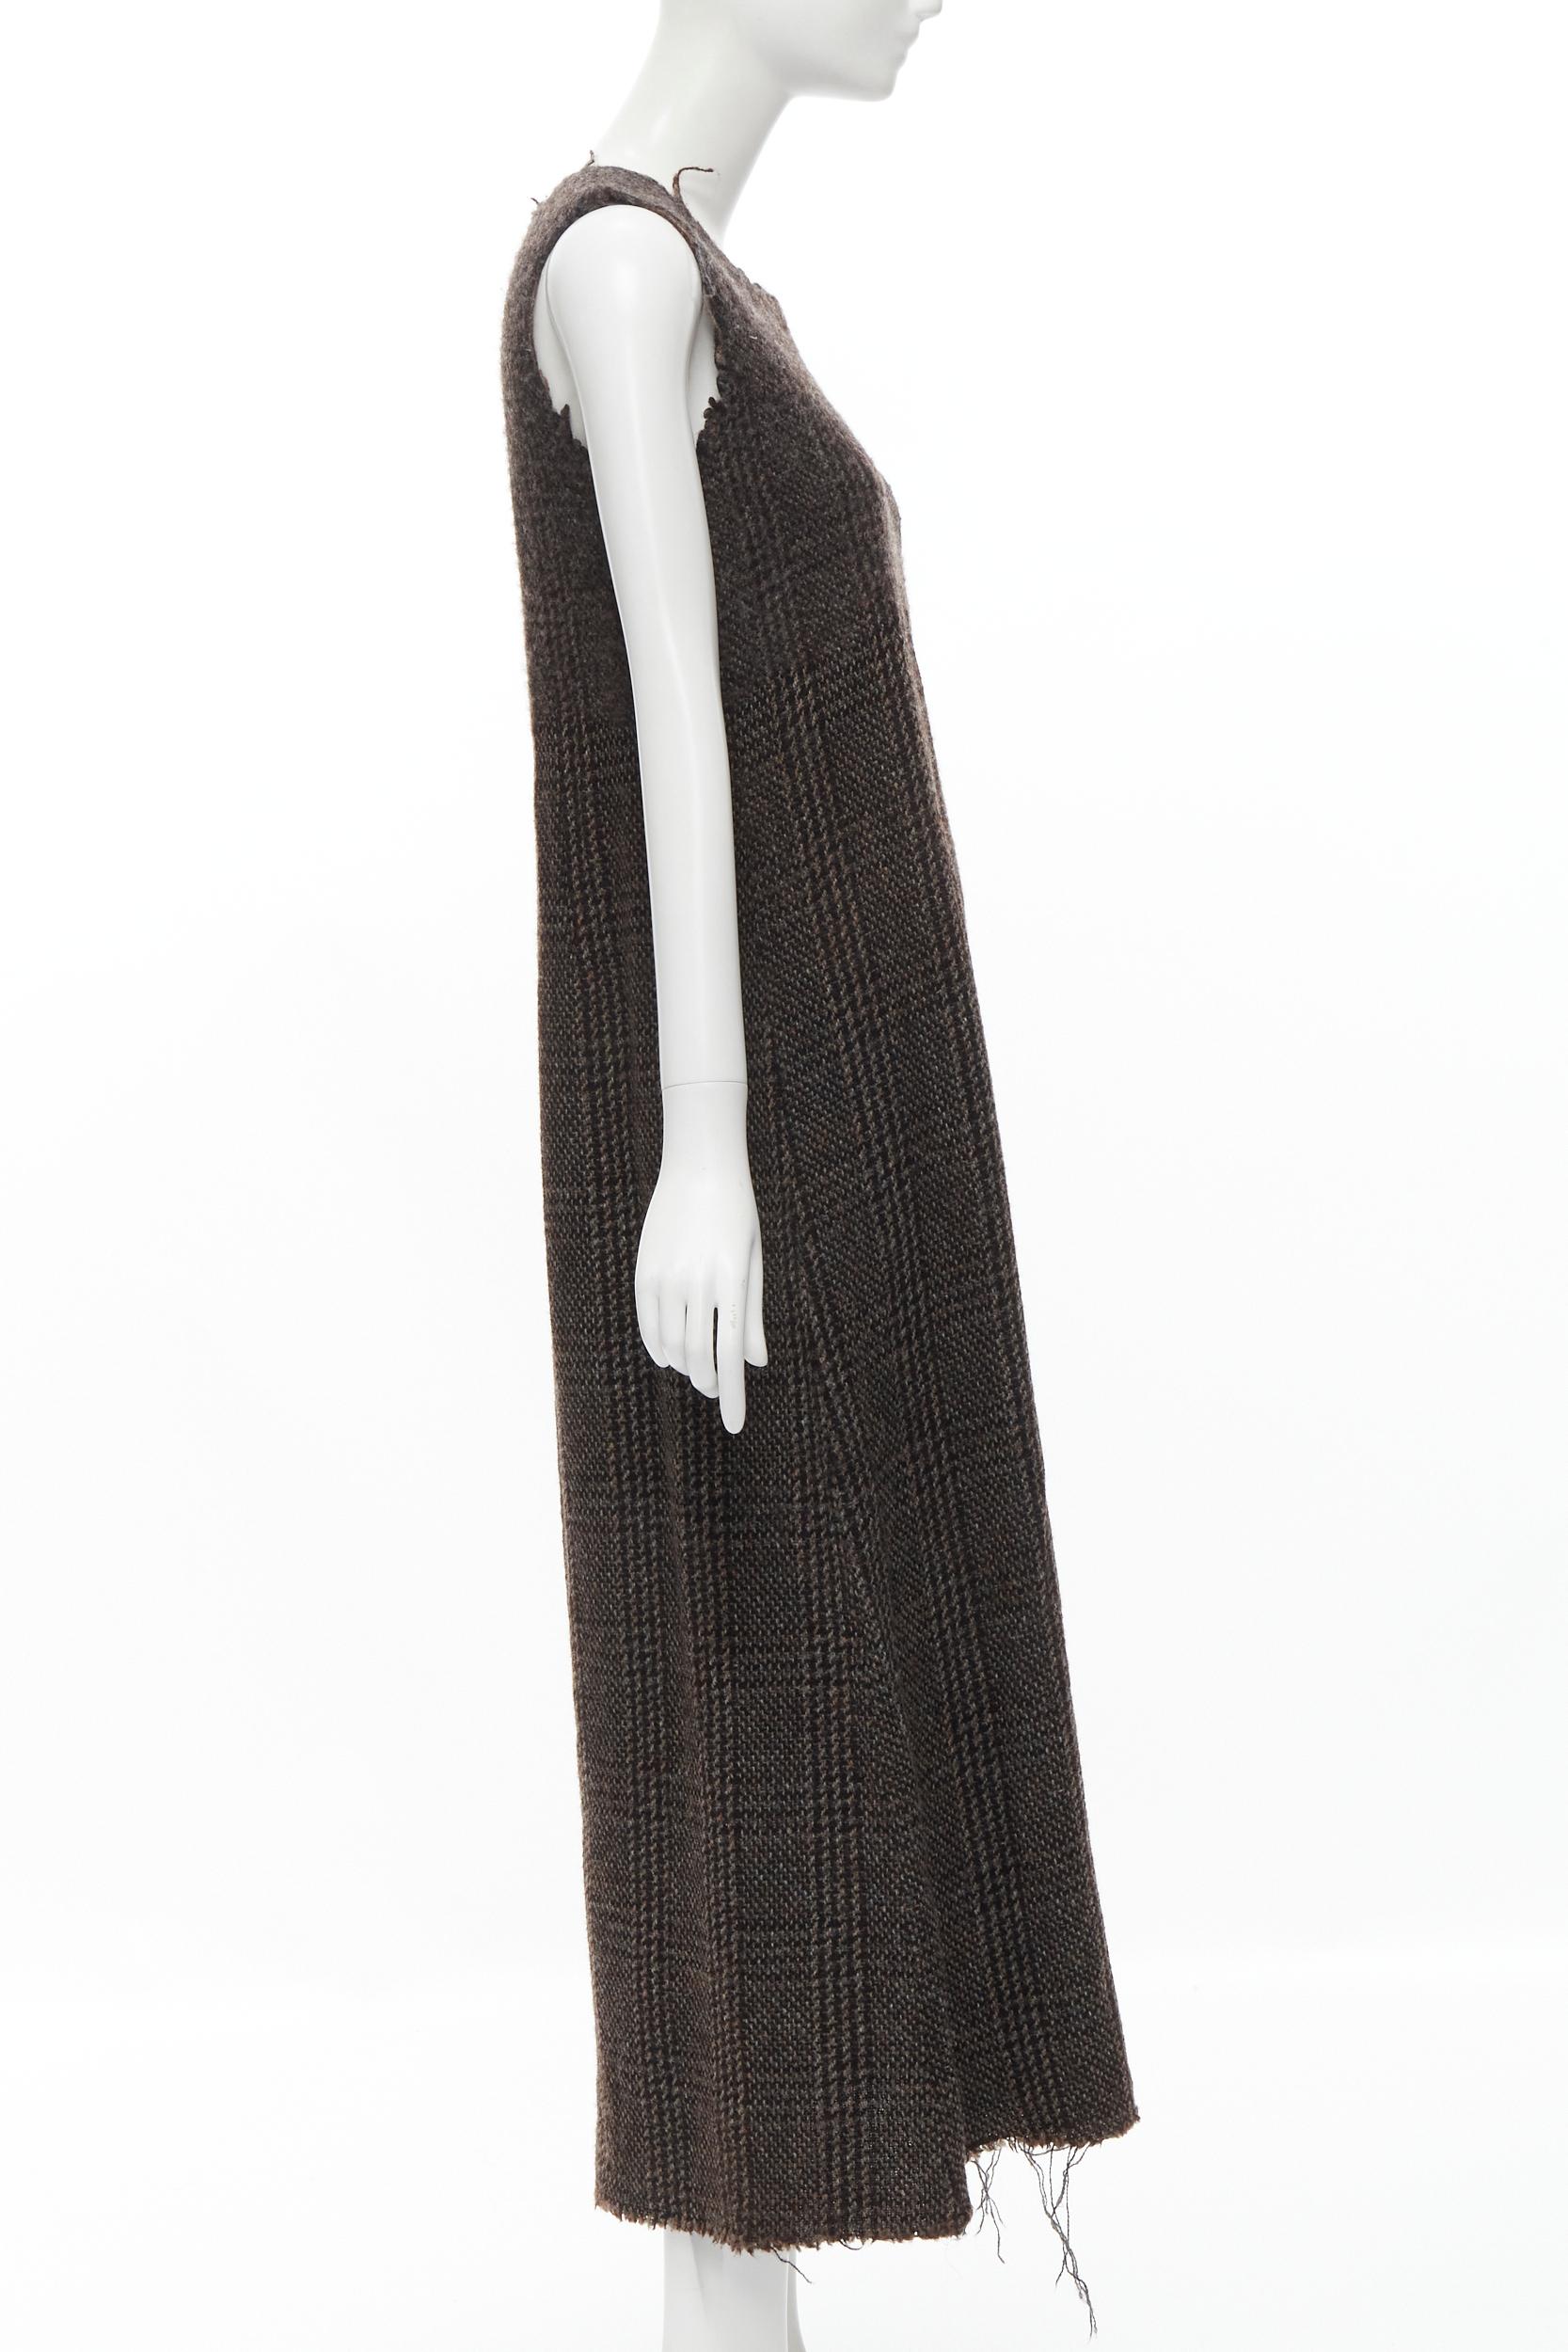 COMME DES GARCONS Vintage 1994 check boiled wool tweed raw frayed midi dress M In Excellent Condition For Sale In Hong Kong, NT